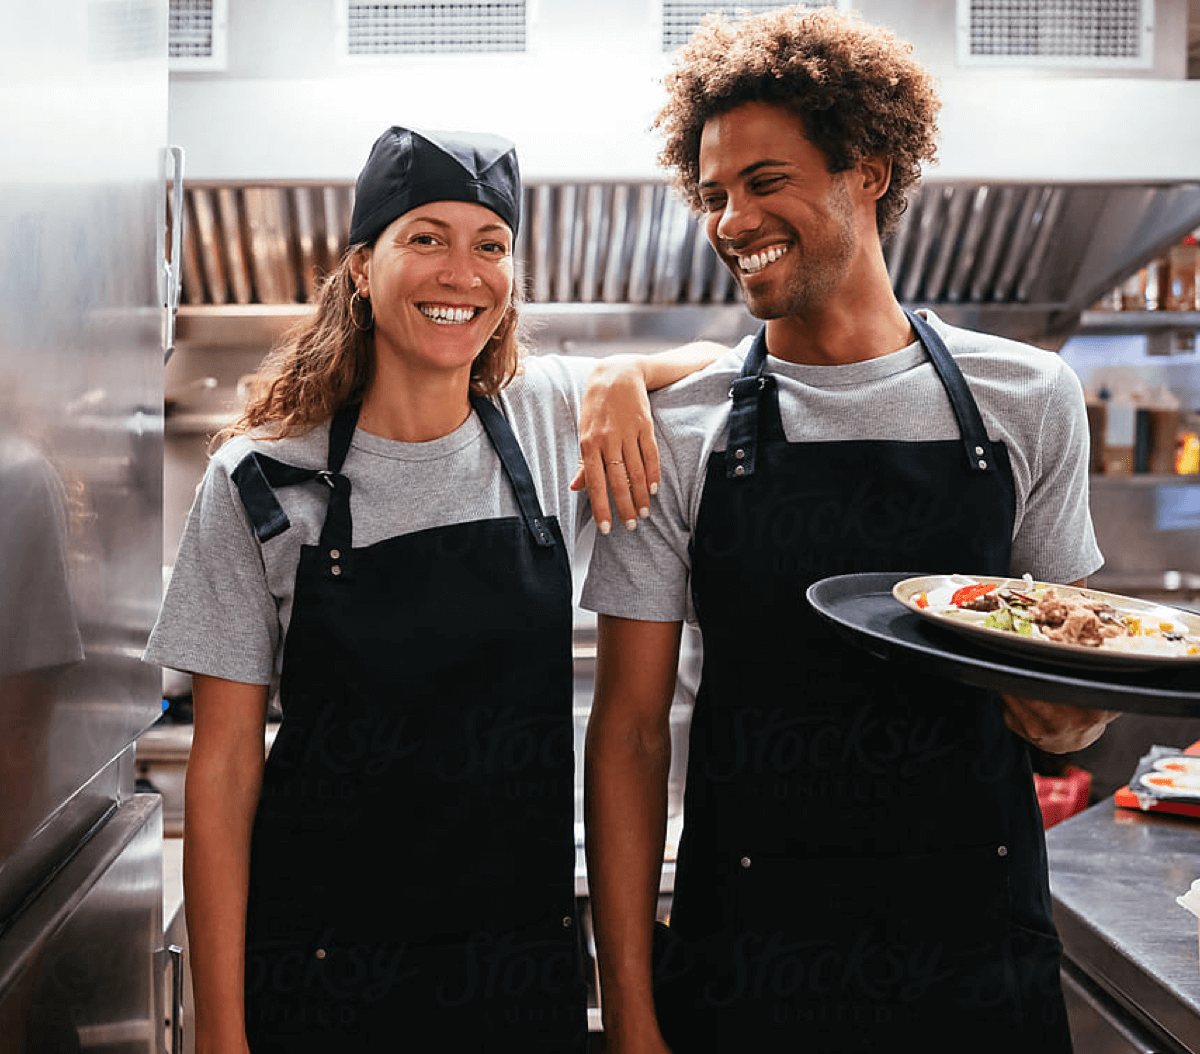 Two restaurant workers happily standing side by side